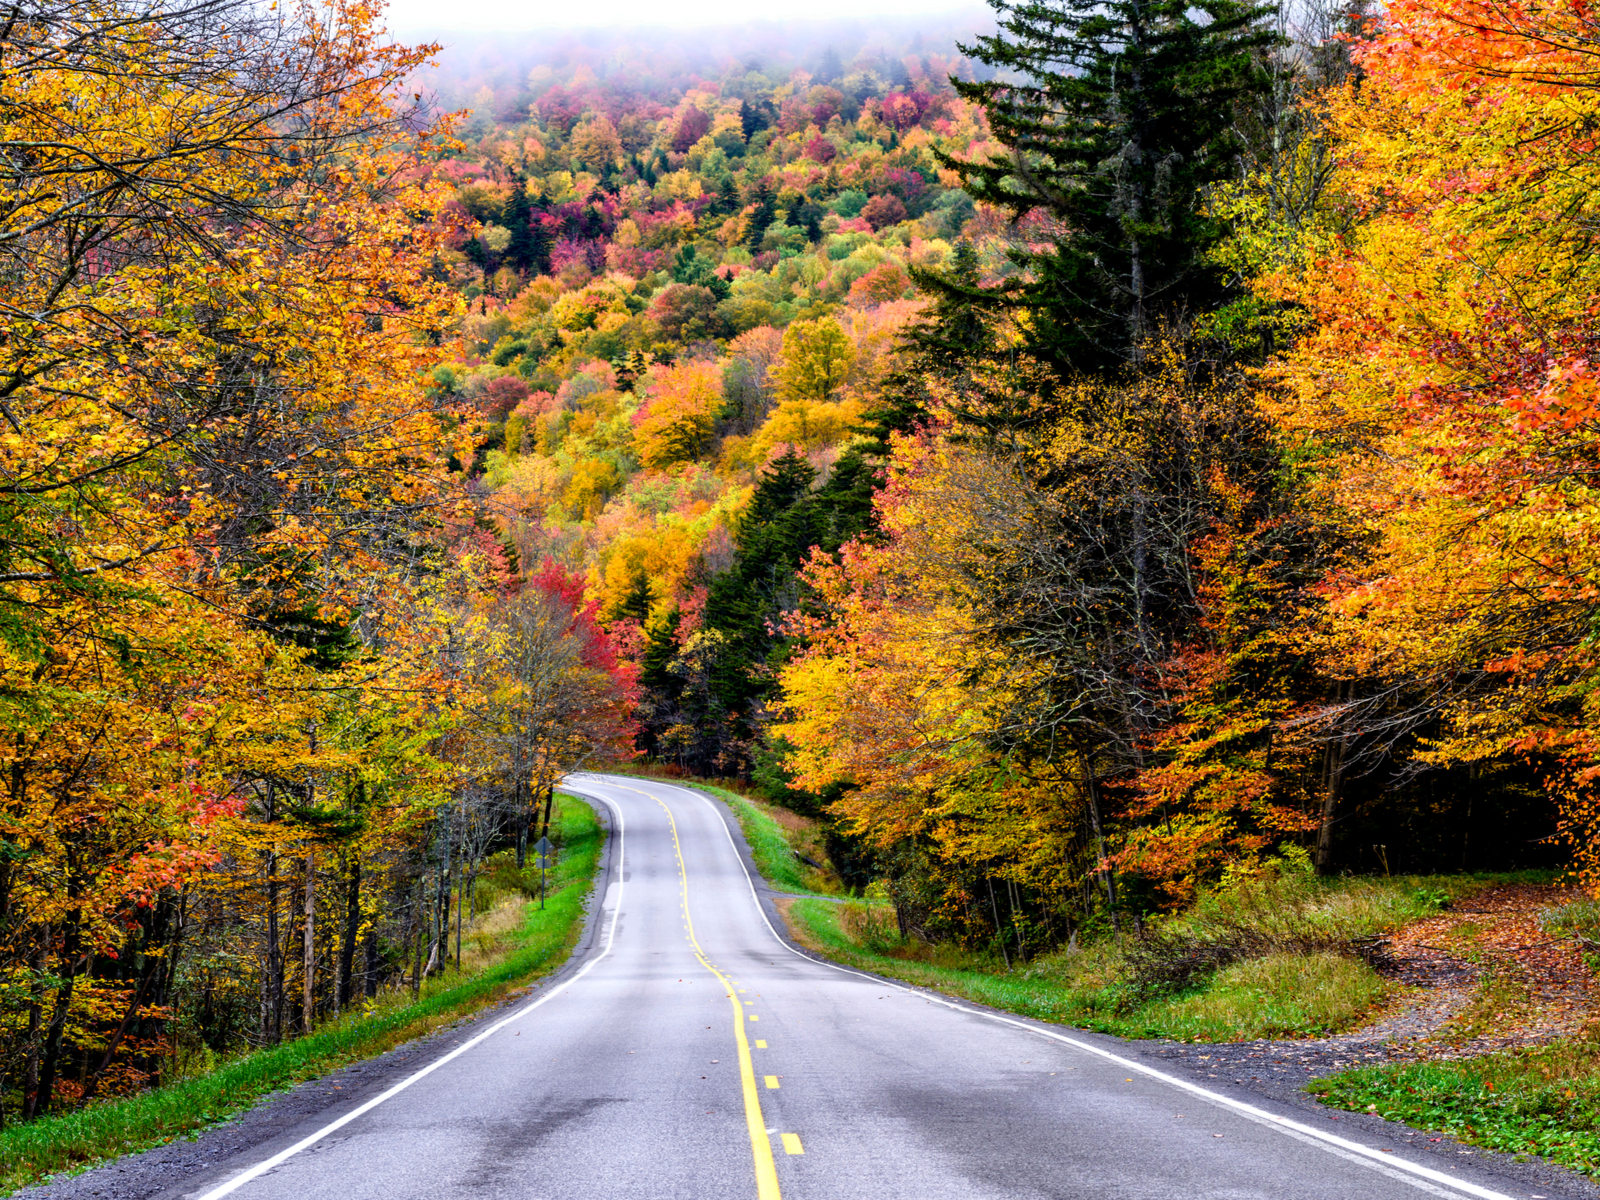 Monongahela National Forest on Route 250, one of the best attractions in West Virginia